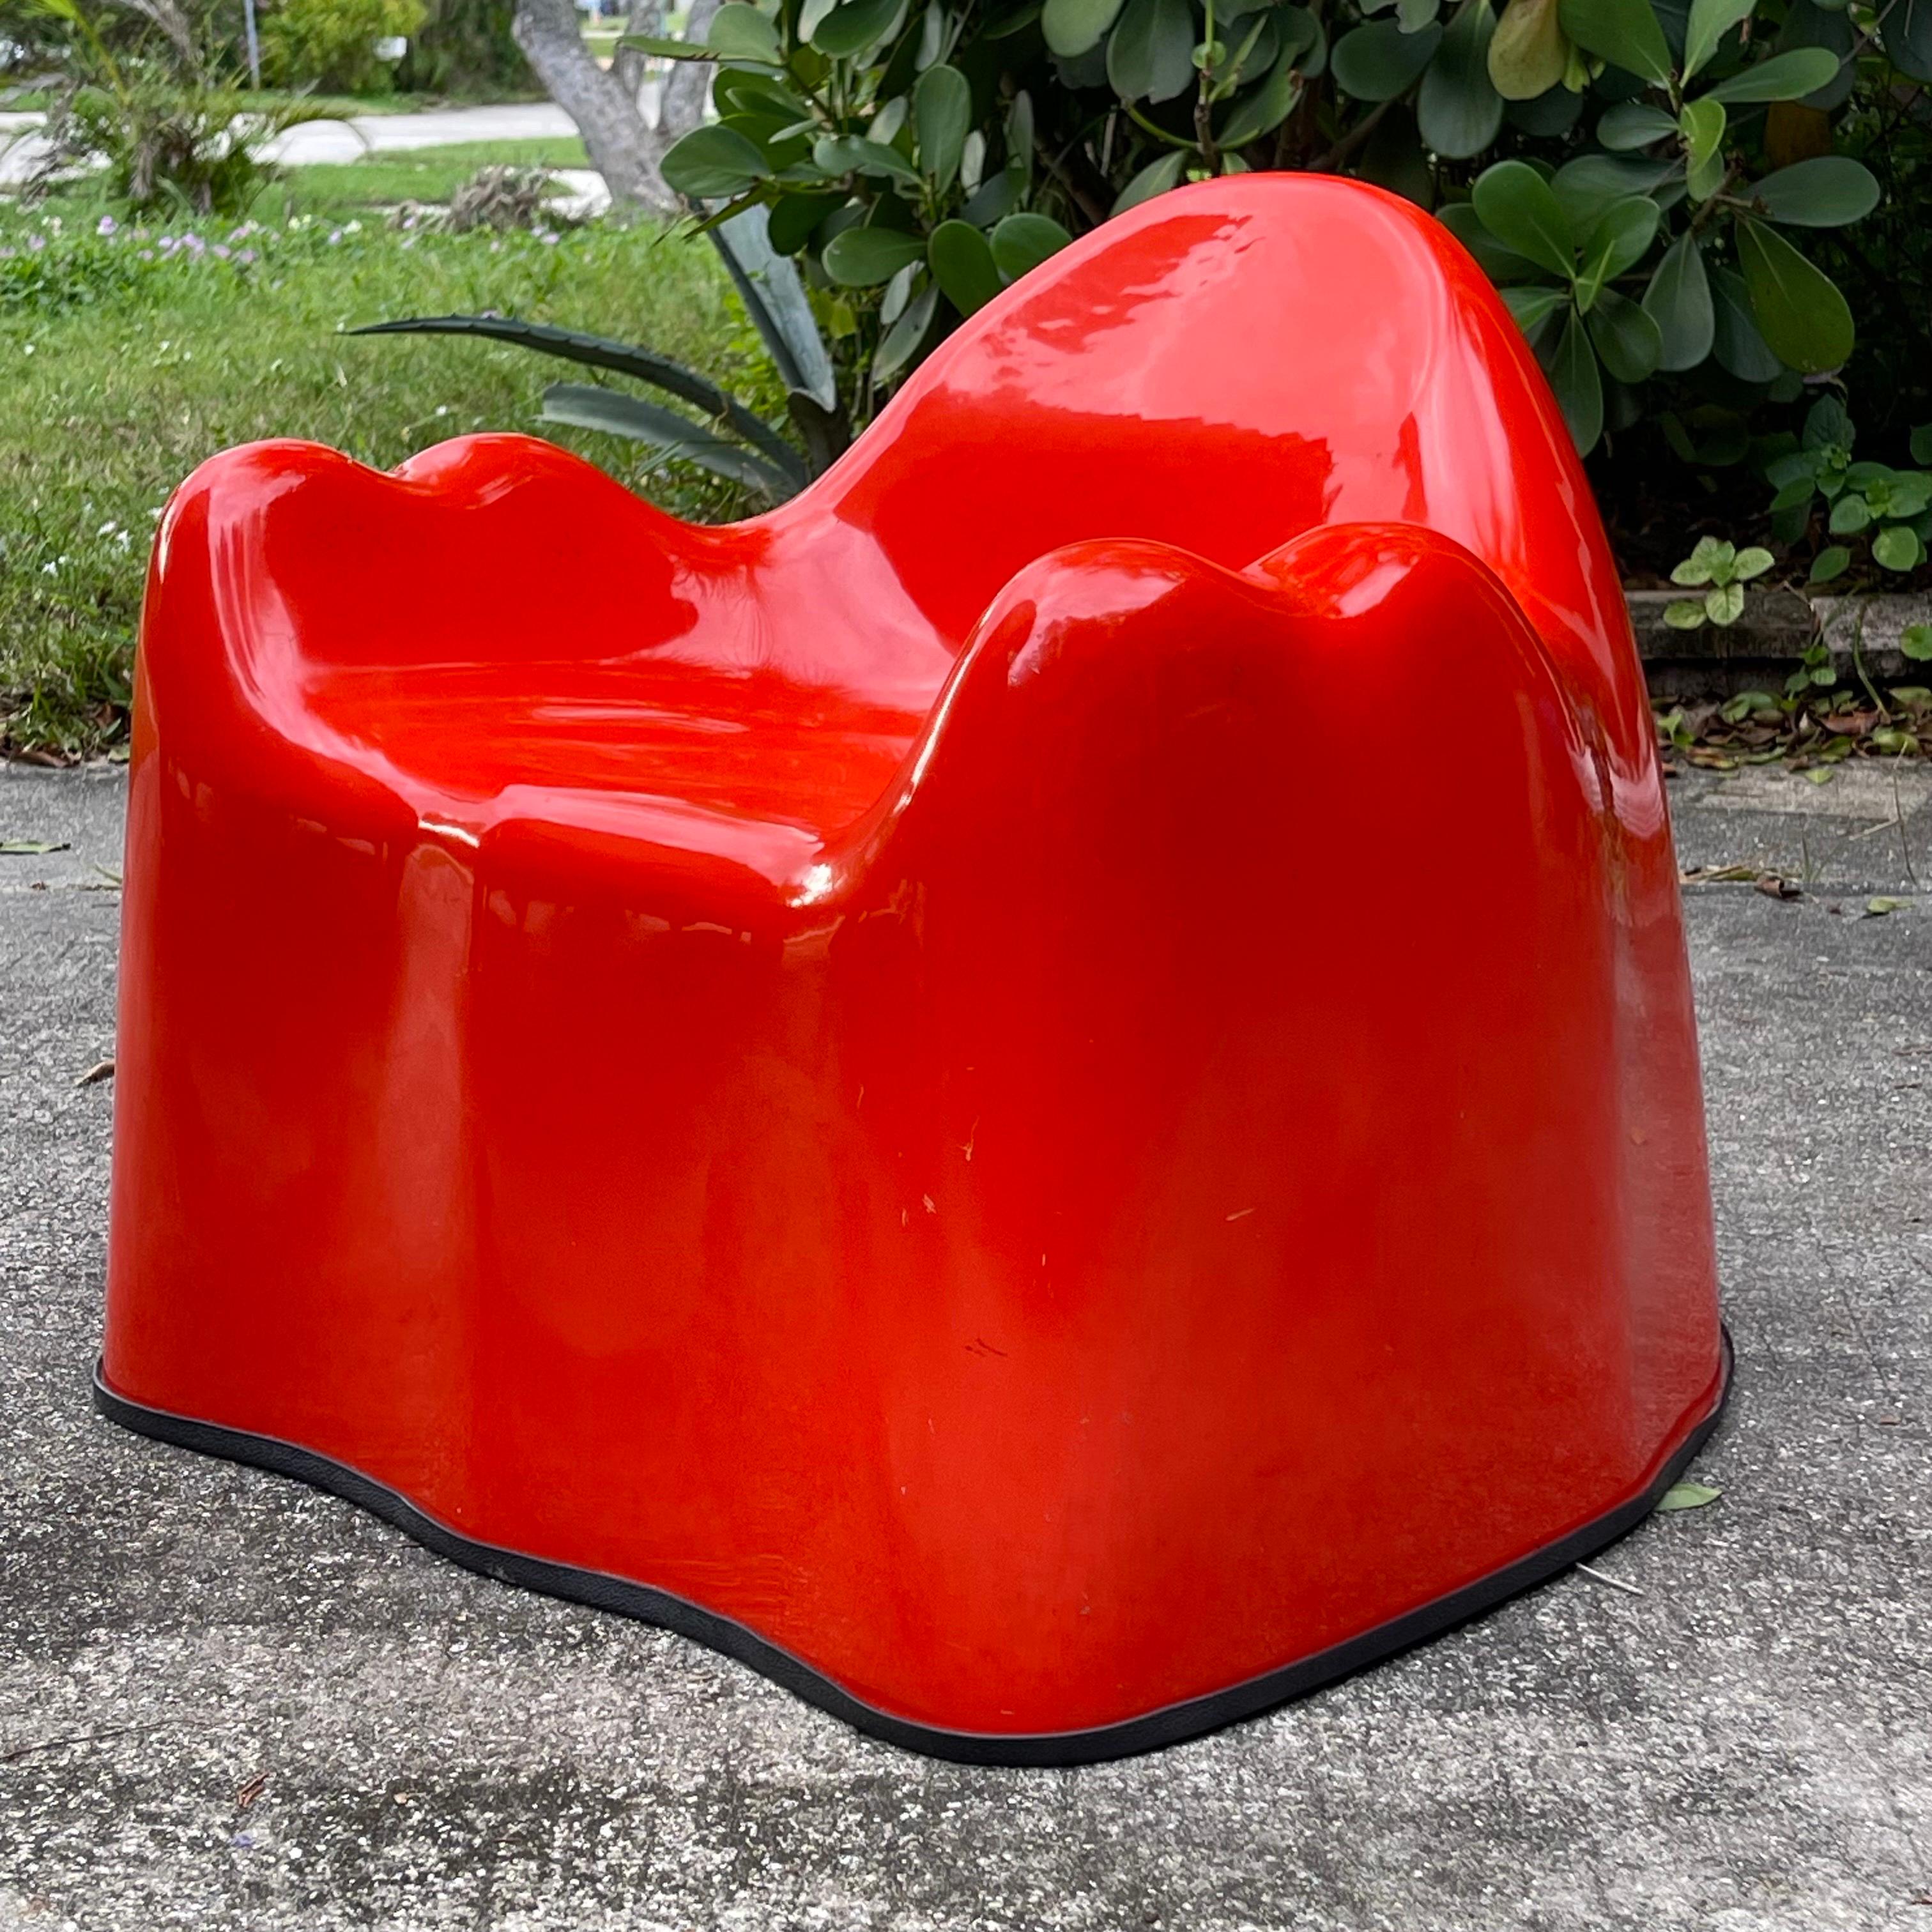 Uncommon child’s size version of Wendell Castle’s iconic Molar chair. Executed in fiberglass and red gel coat. Sprite can shown for scale.